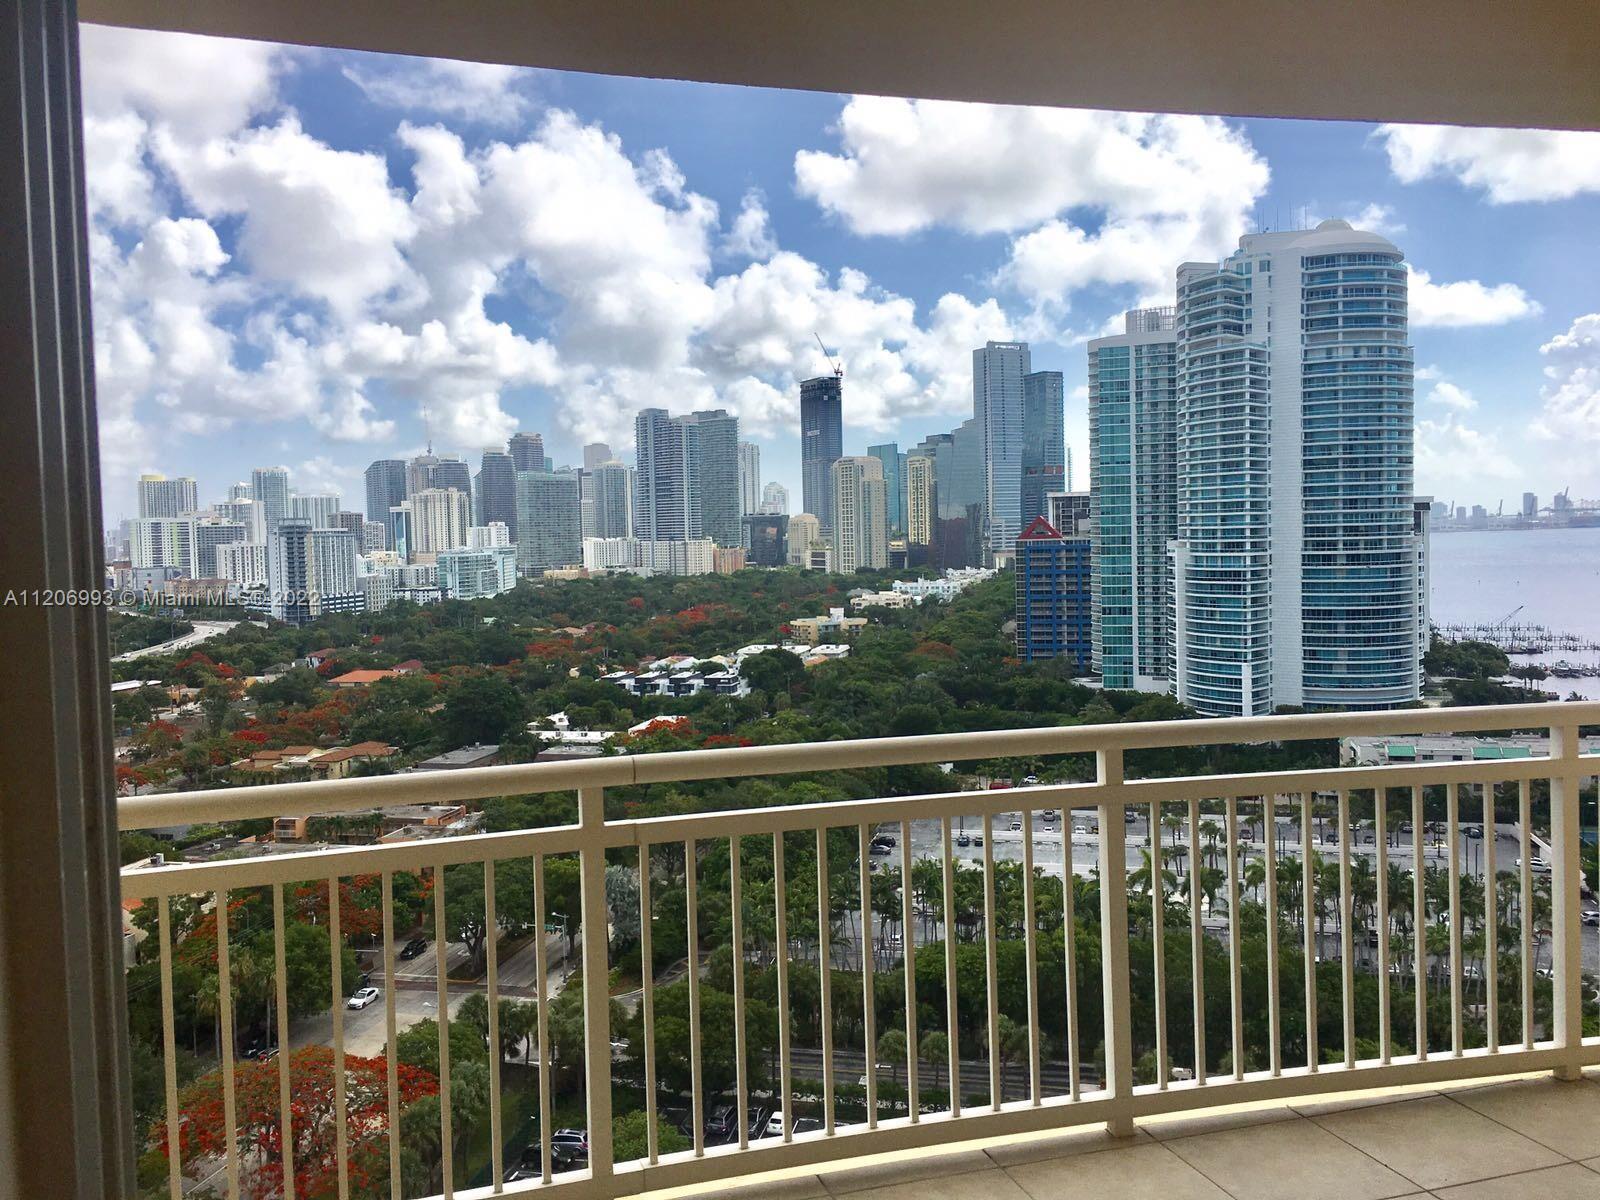 Great opportunity to buy in the best location of Brickell Av. Far from the heavy traffic, close to I